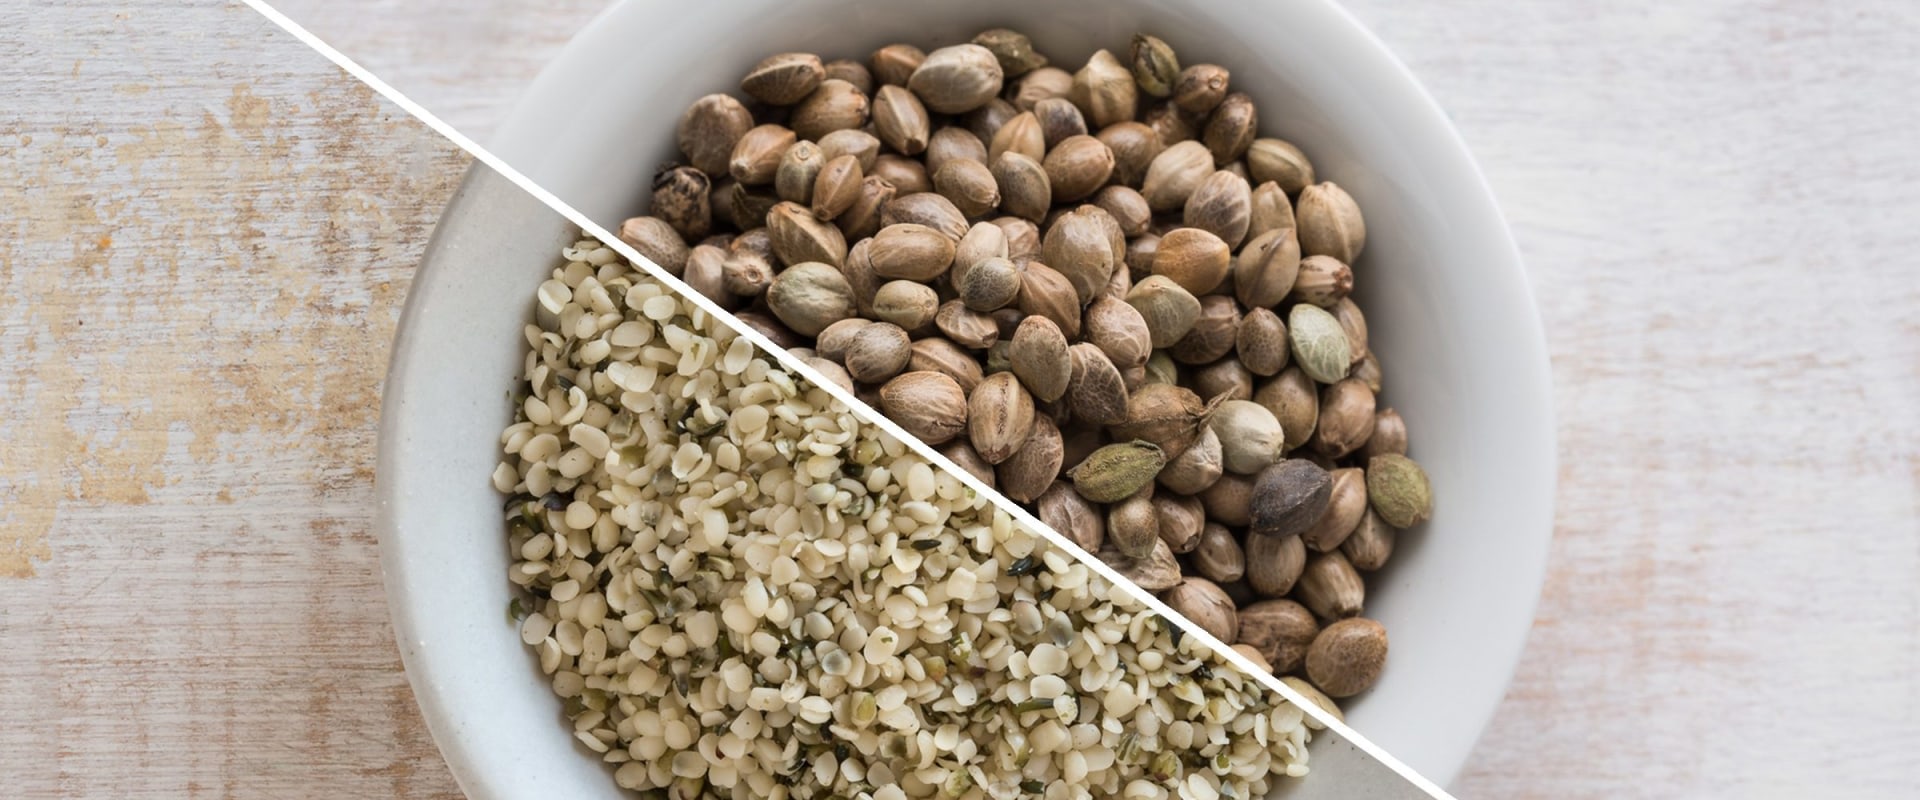 What is Hemp Seed and What is it Used For?